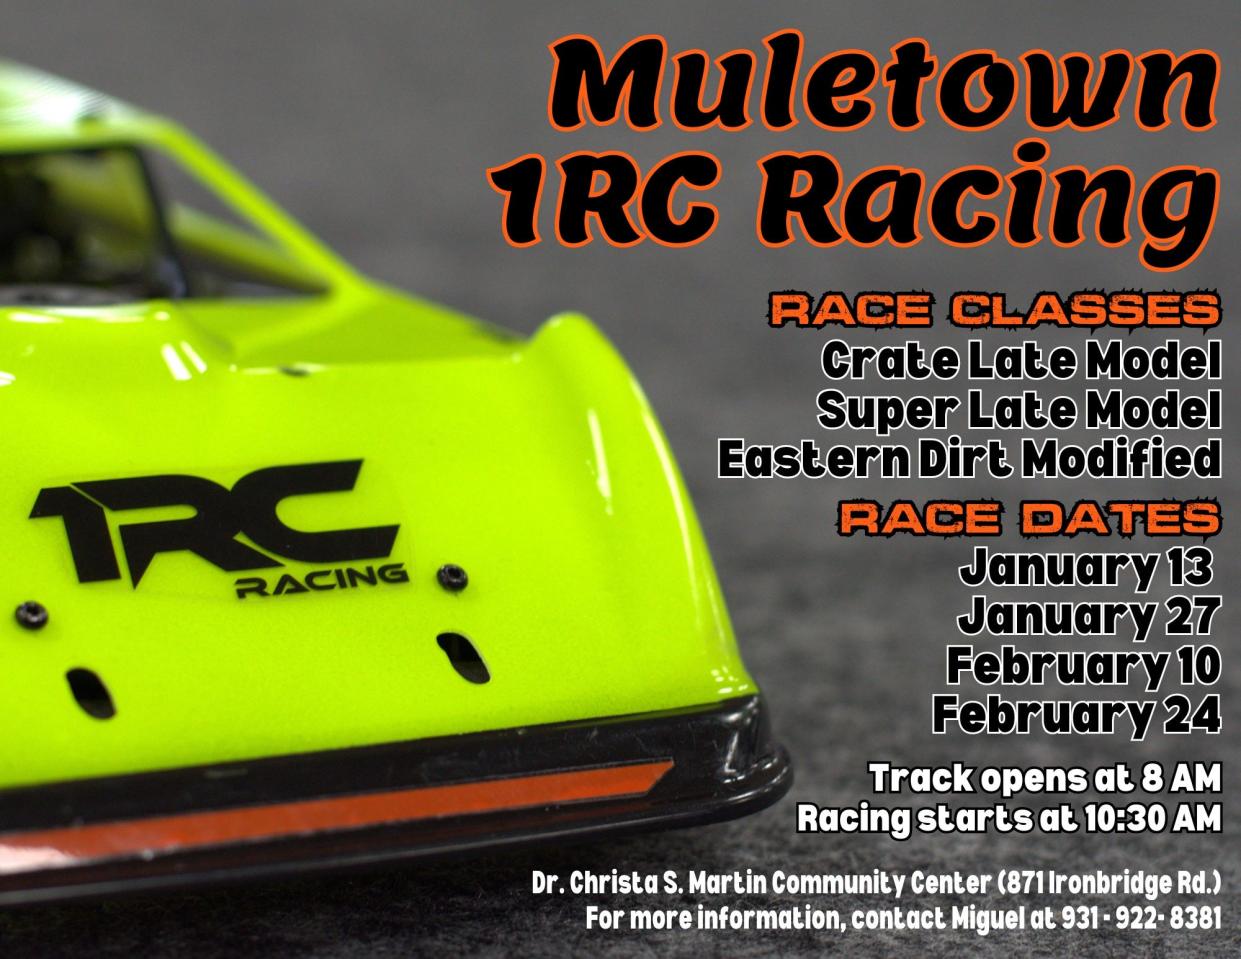 Race with RC cars at Fairview Park's Christa S. Martin Community Center starting at 10:30 a.m. Saturday.